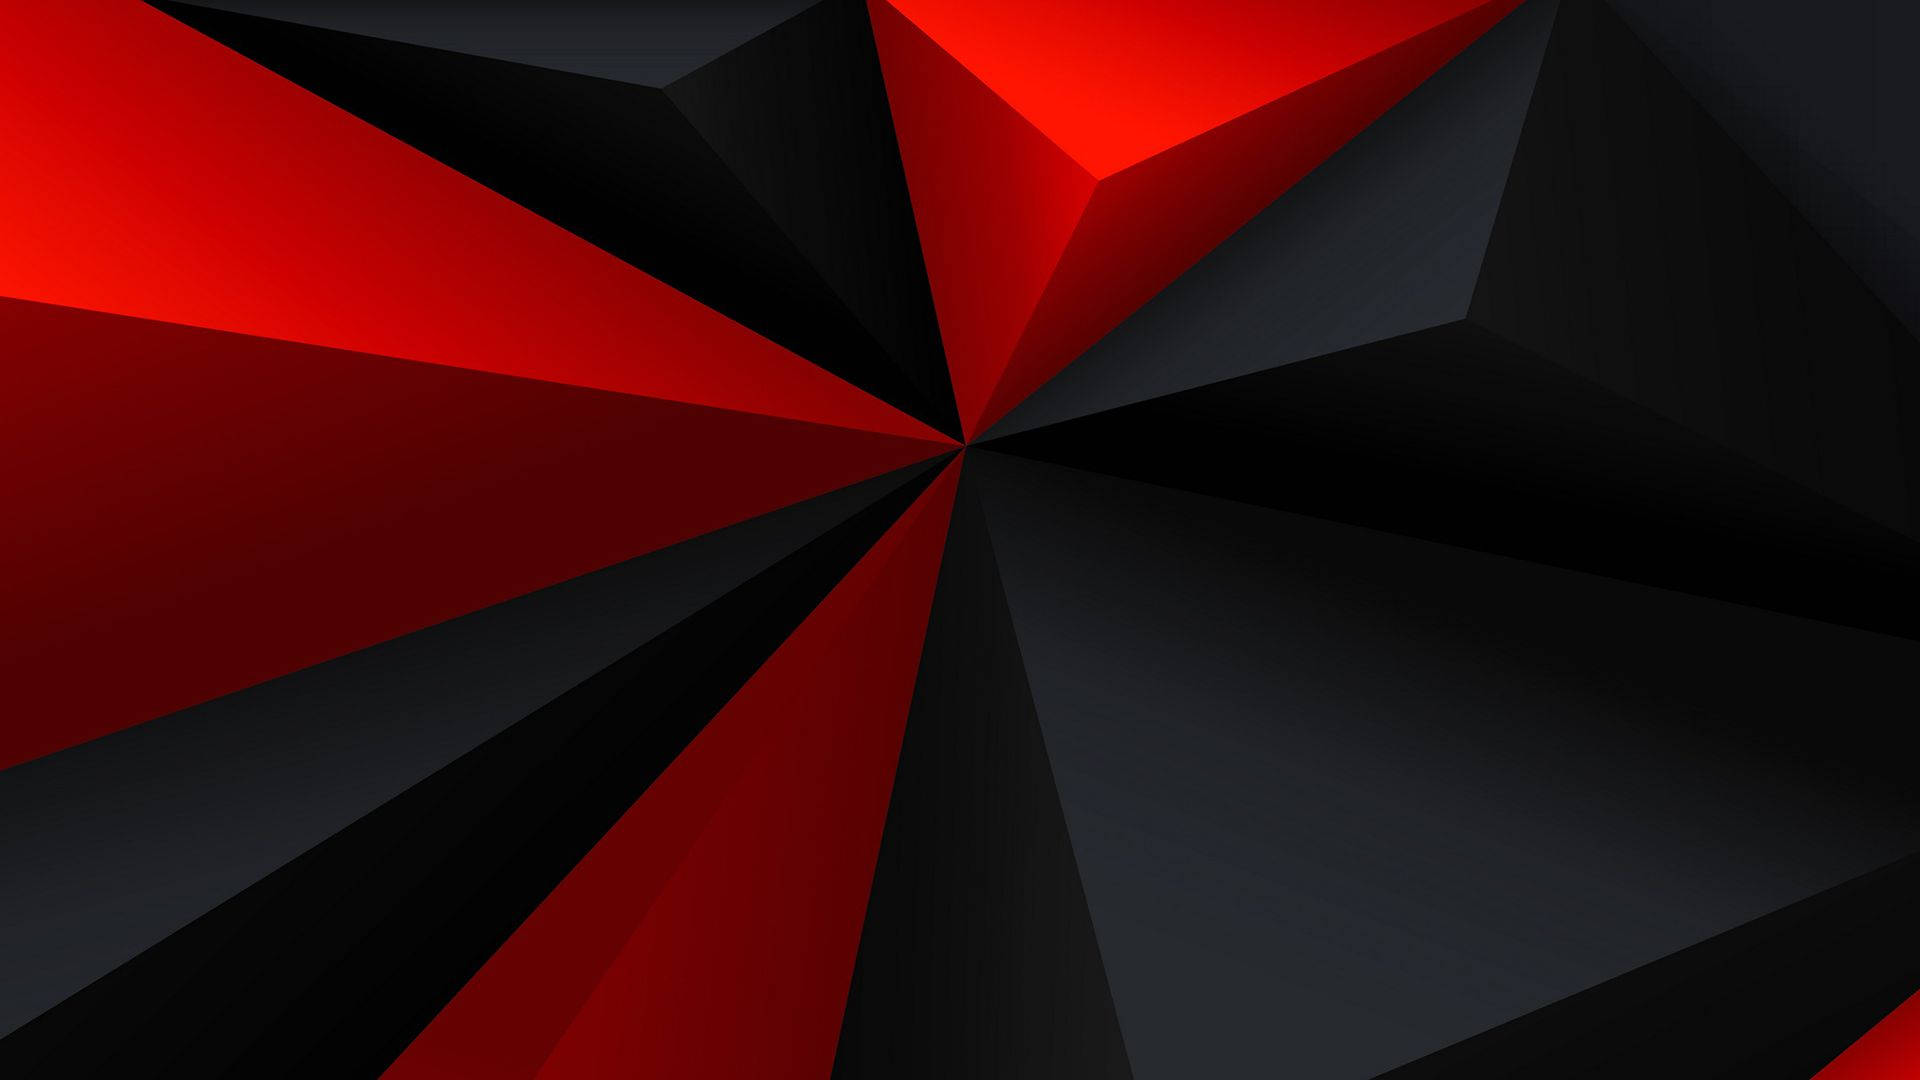 600+] Red And Black Wallpapers 